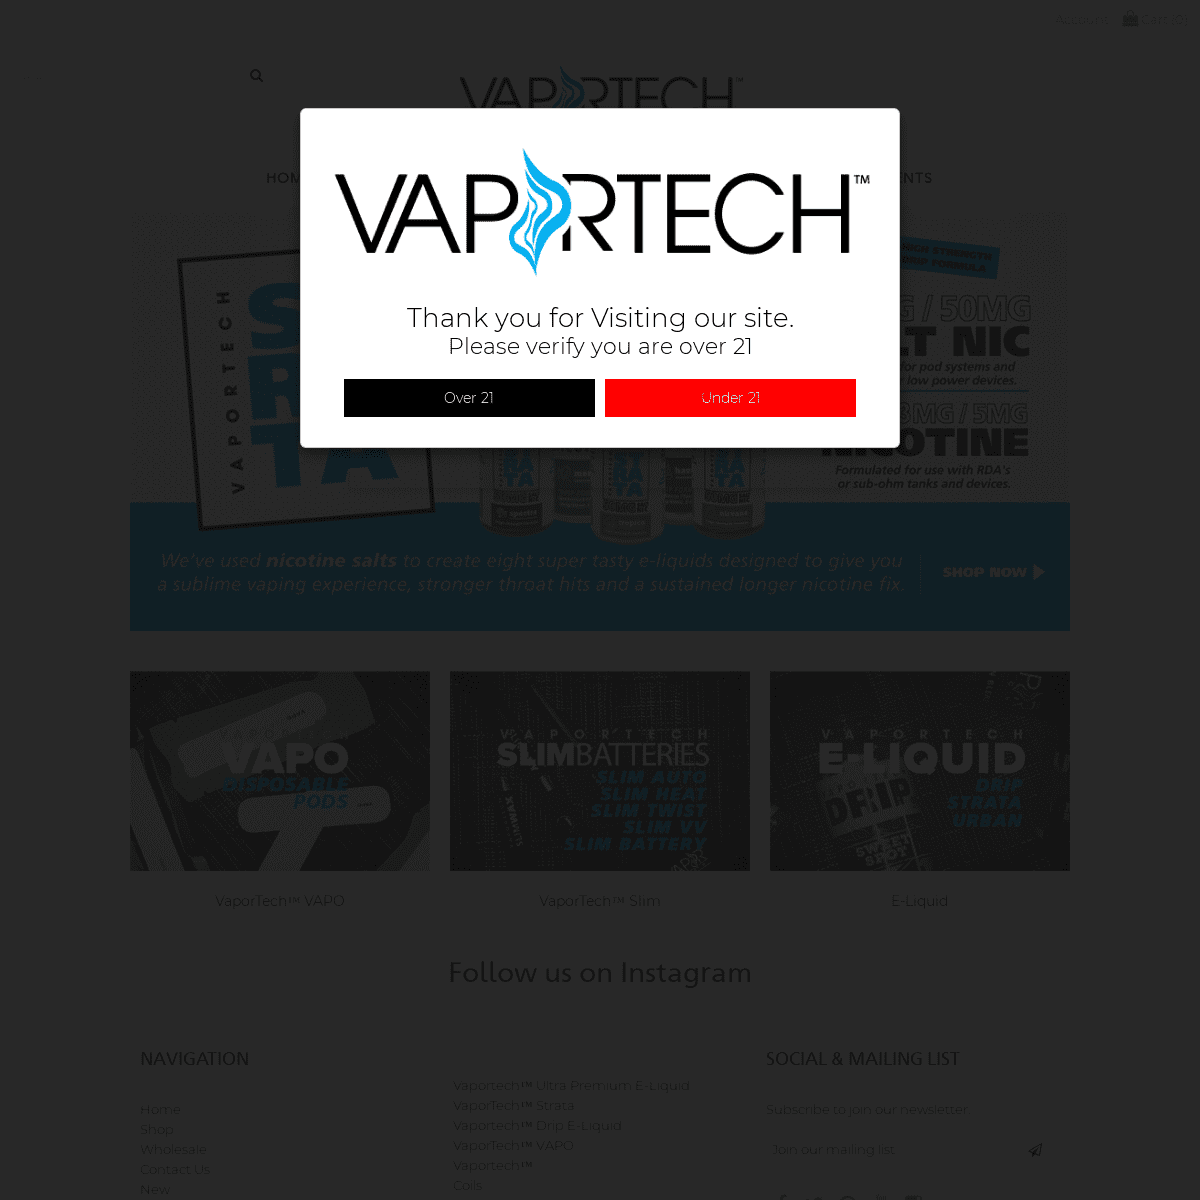 Welcome to Vaportech Home of the Vapo and Slim Lines